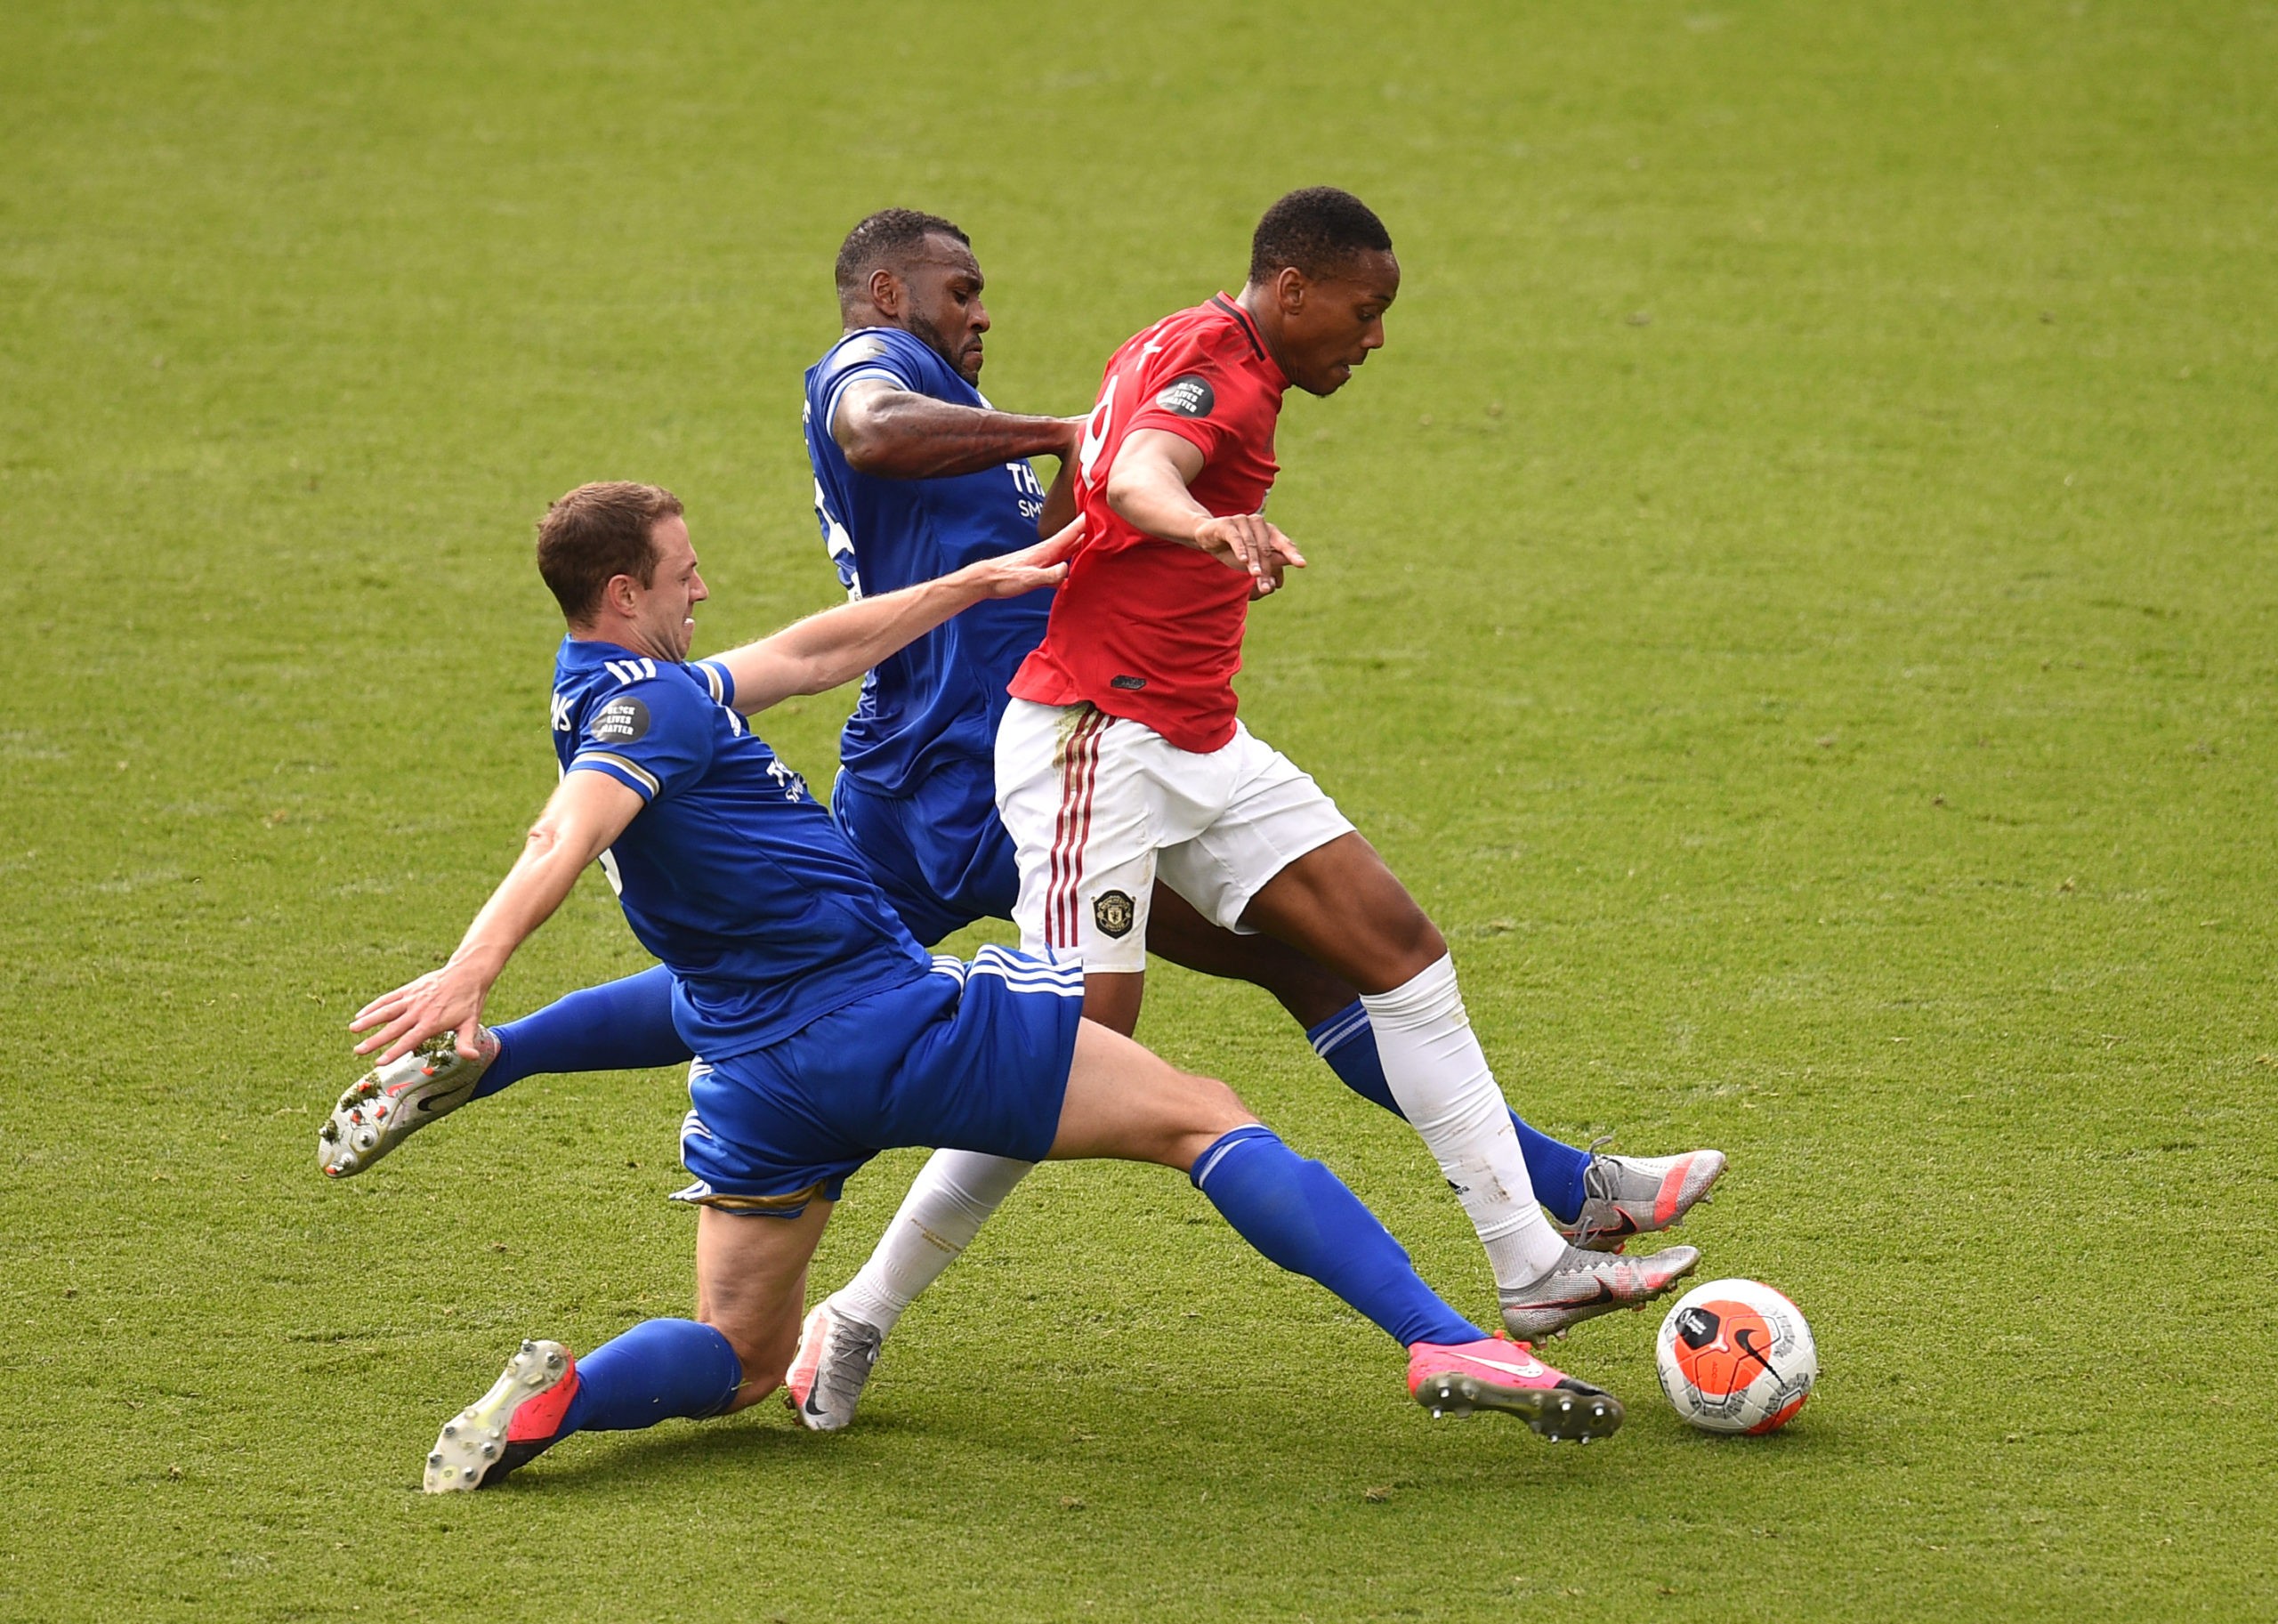 LEICESTER, ENGLAND - JULY 26: Anthony Martial of Manchester United is tackled by Wes Morgan and Jonny Evans both of Leicester City leading to a penalty during the Premier League match between Leicester City and Manchester United at The King Power Stadium on July 26, 2020 in Leicester, England.Football Stadiums around Europe remain empty due to the Coronavirus Pandemic as Government social distancing laws prohibit fans inside venues resulting in all fixtures being played behind closed doors. (Photo by Oli Scarff/Pool via Getty Images)